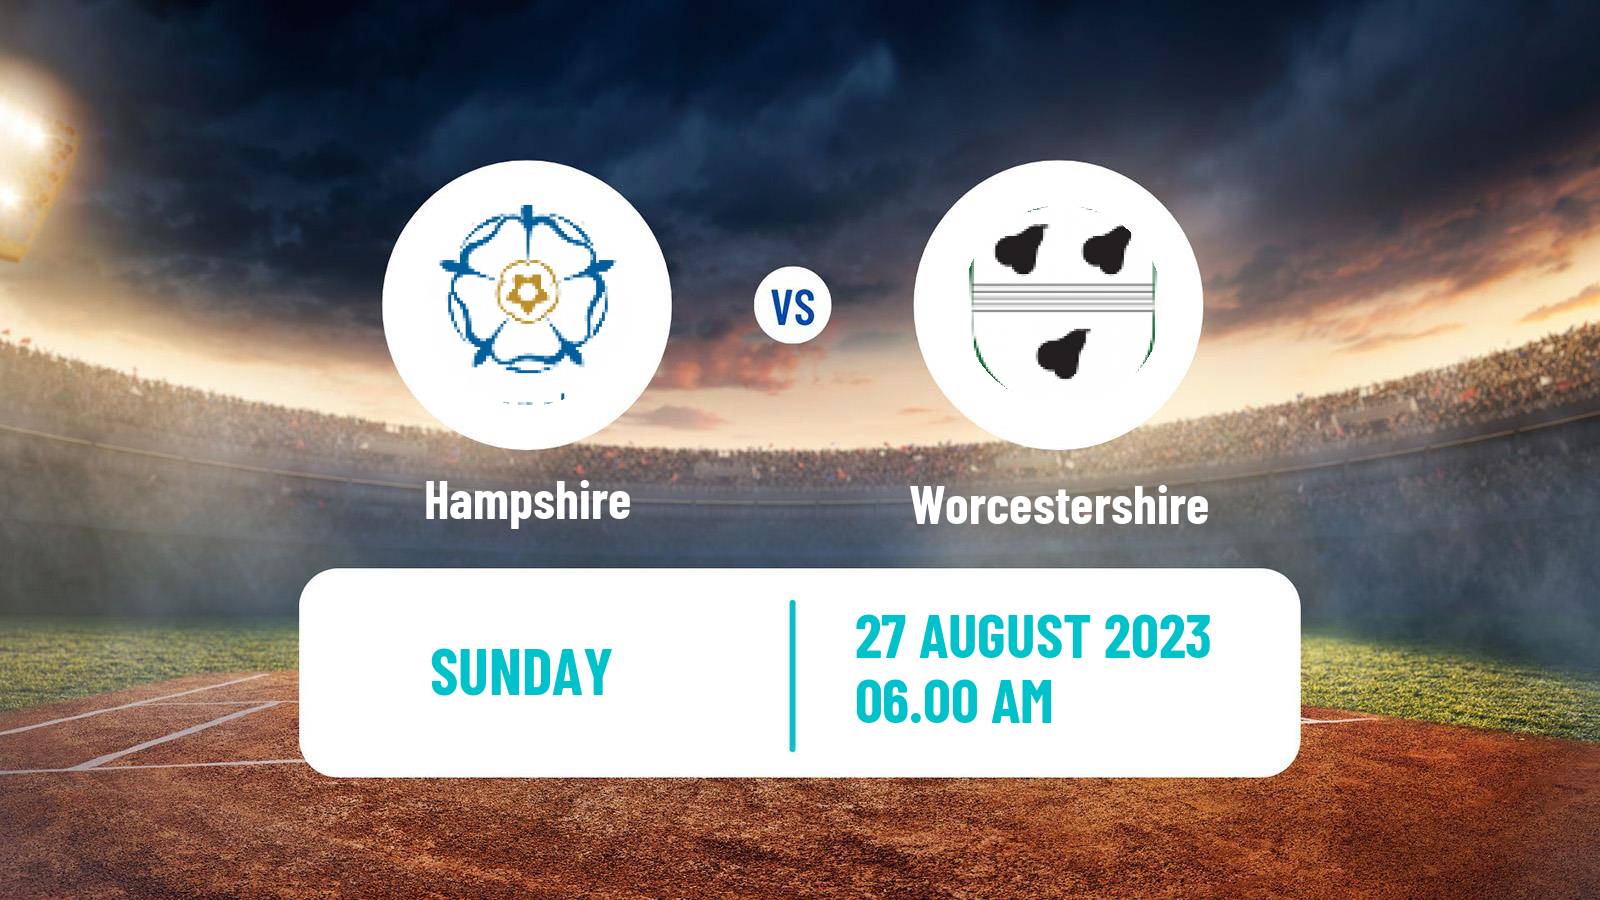 Cricket Royal London One-Day Cup Hampshire - Worcestershire